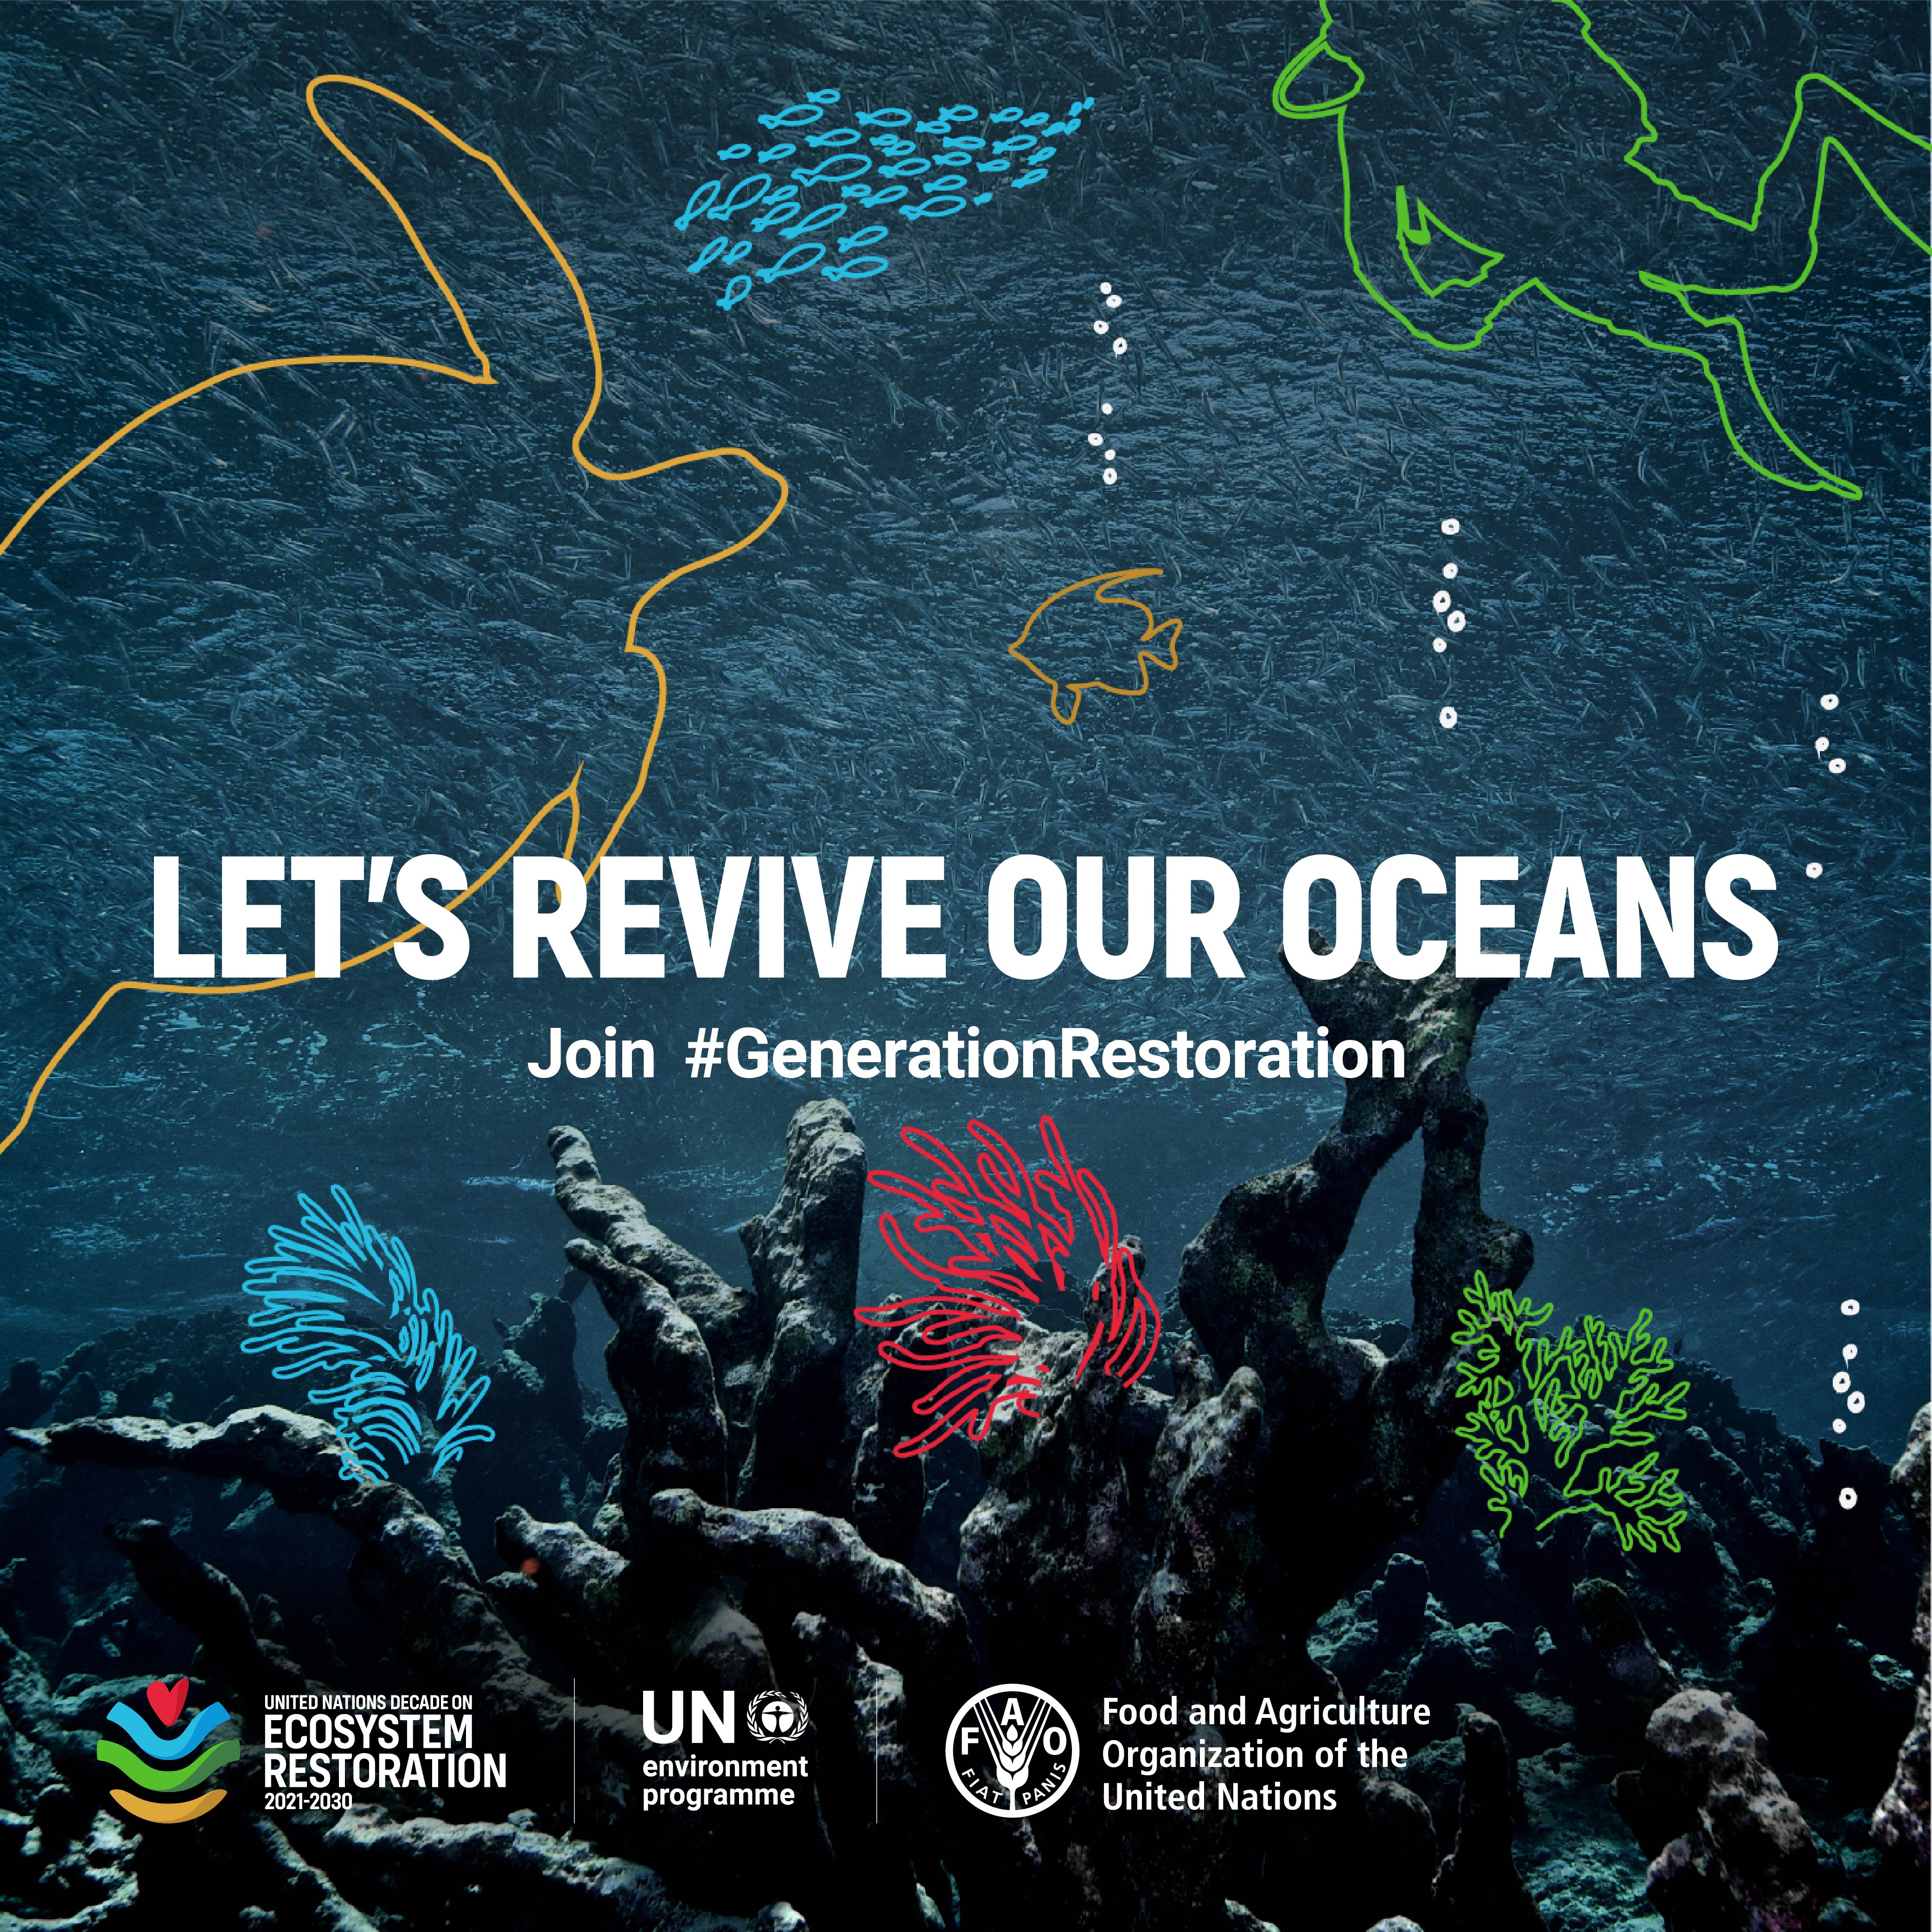 Revive our oceans